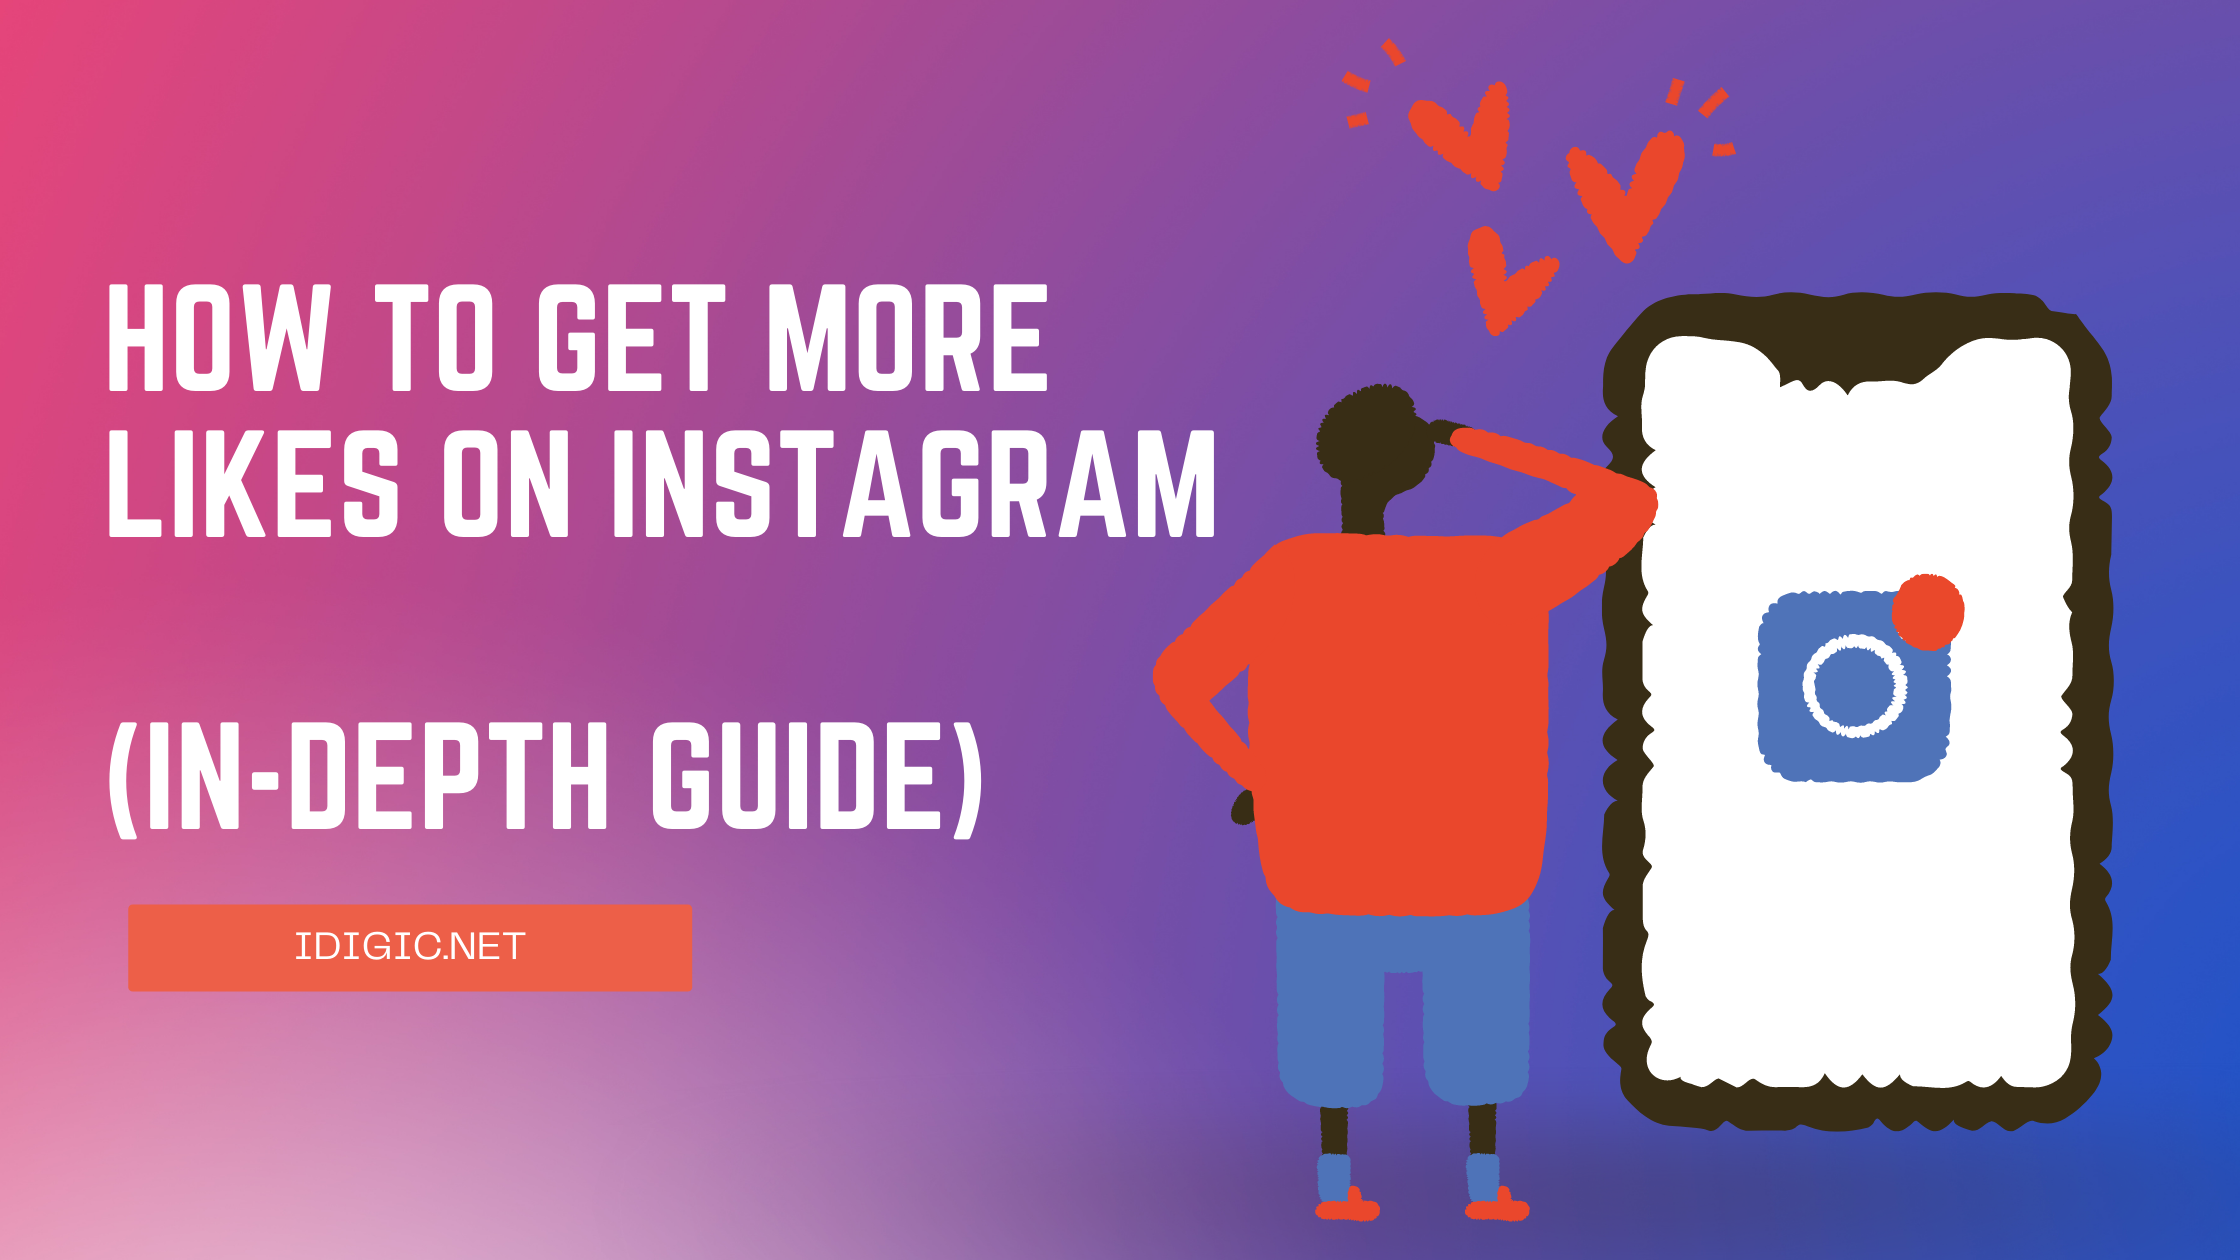 How to Get More Likes on Instagram: (In-Depth Guide)